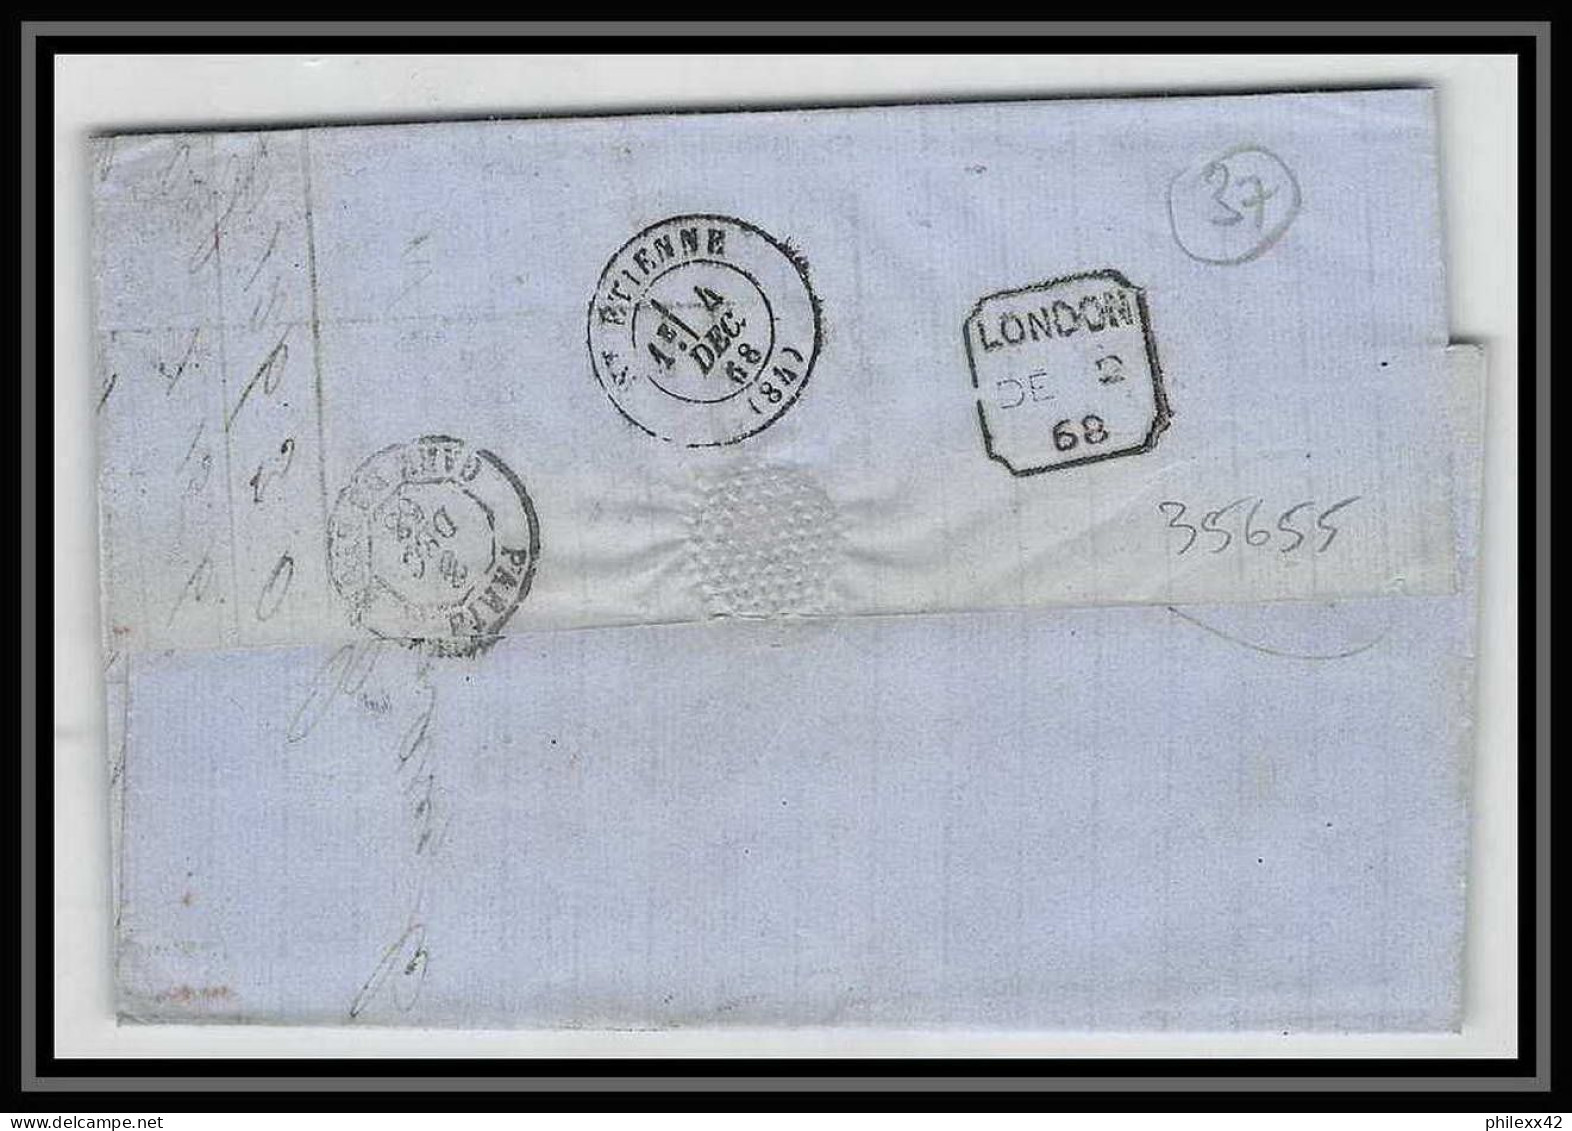 35655 N°32 Victoria 4p Red London St Etienne France 1868 Cachet 47 Lettre Cover Grande Bretagne England - Covers & Documents